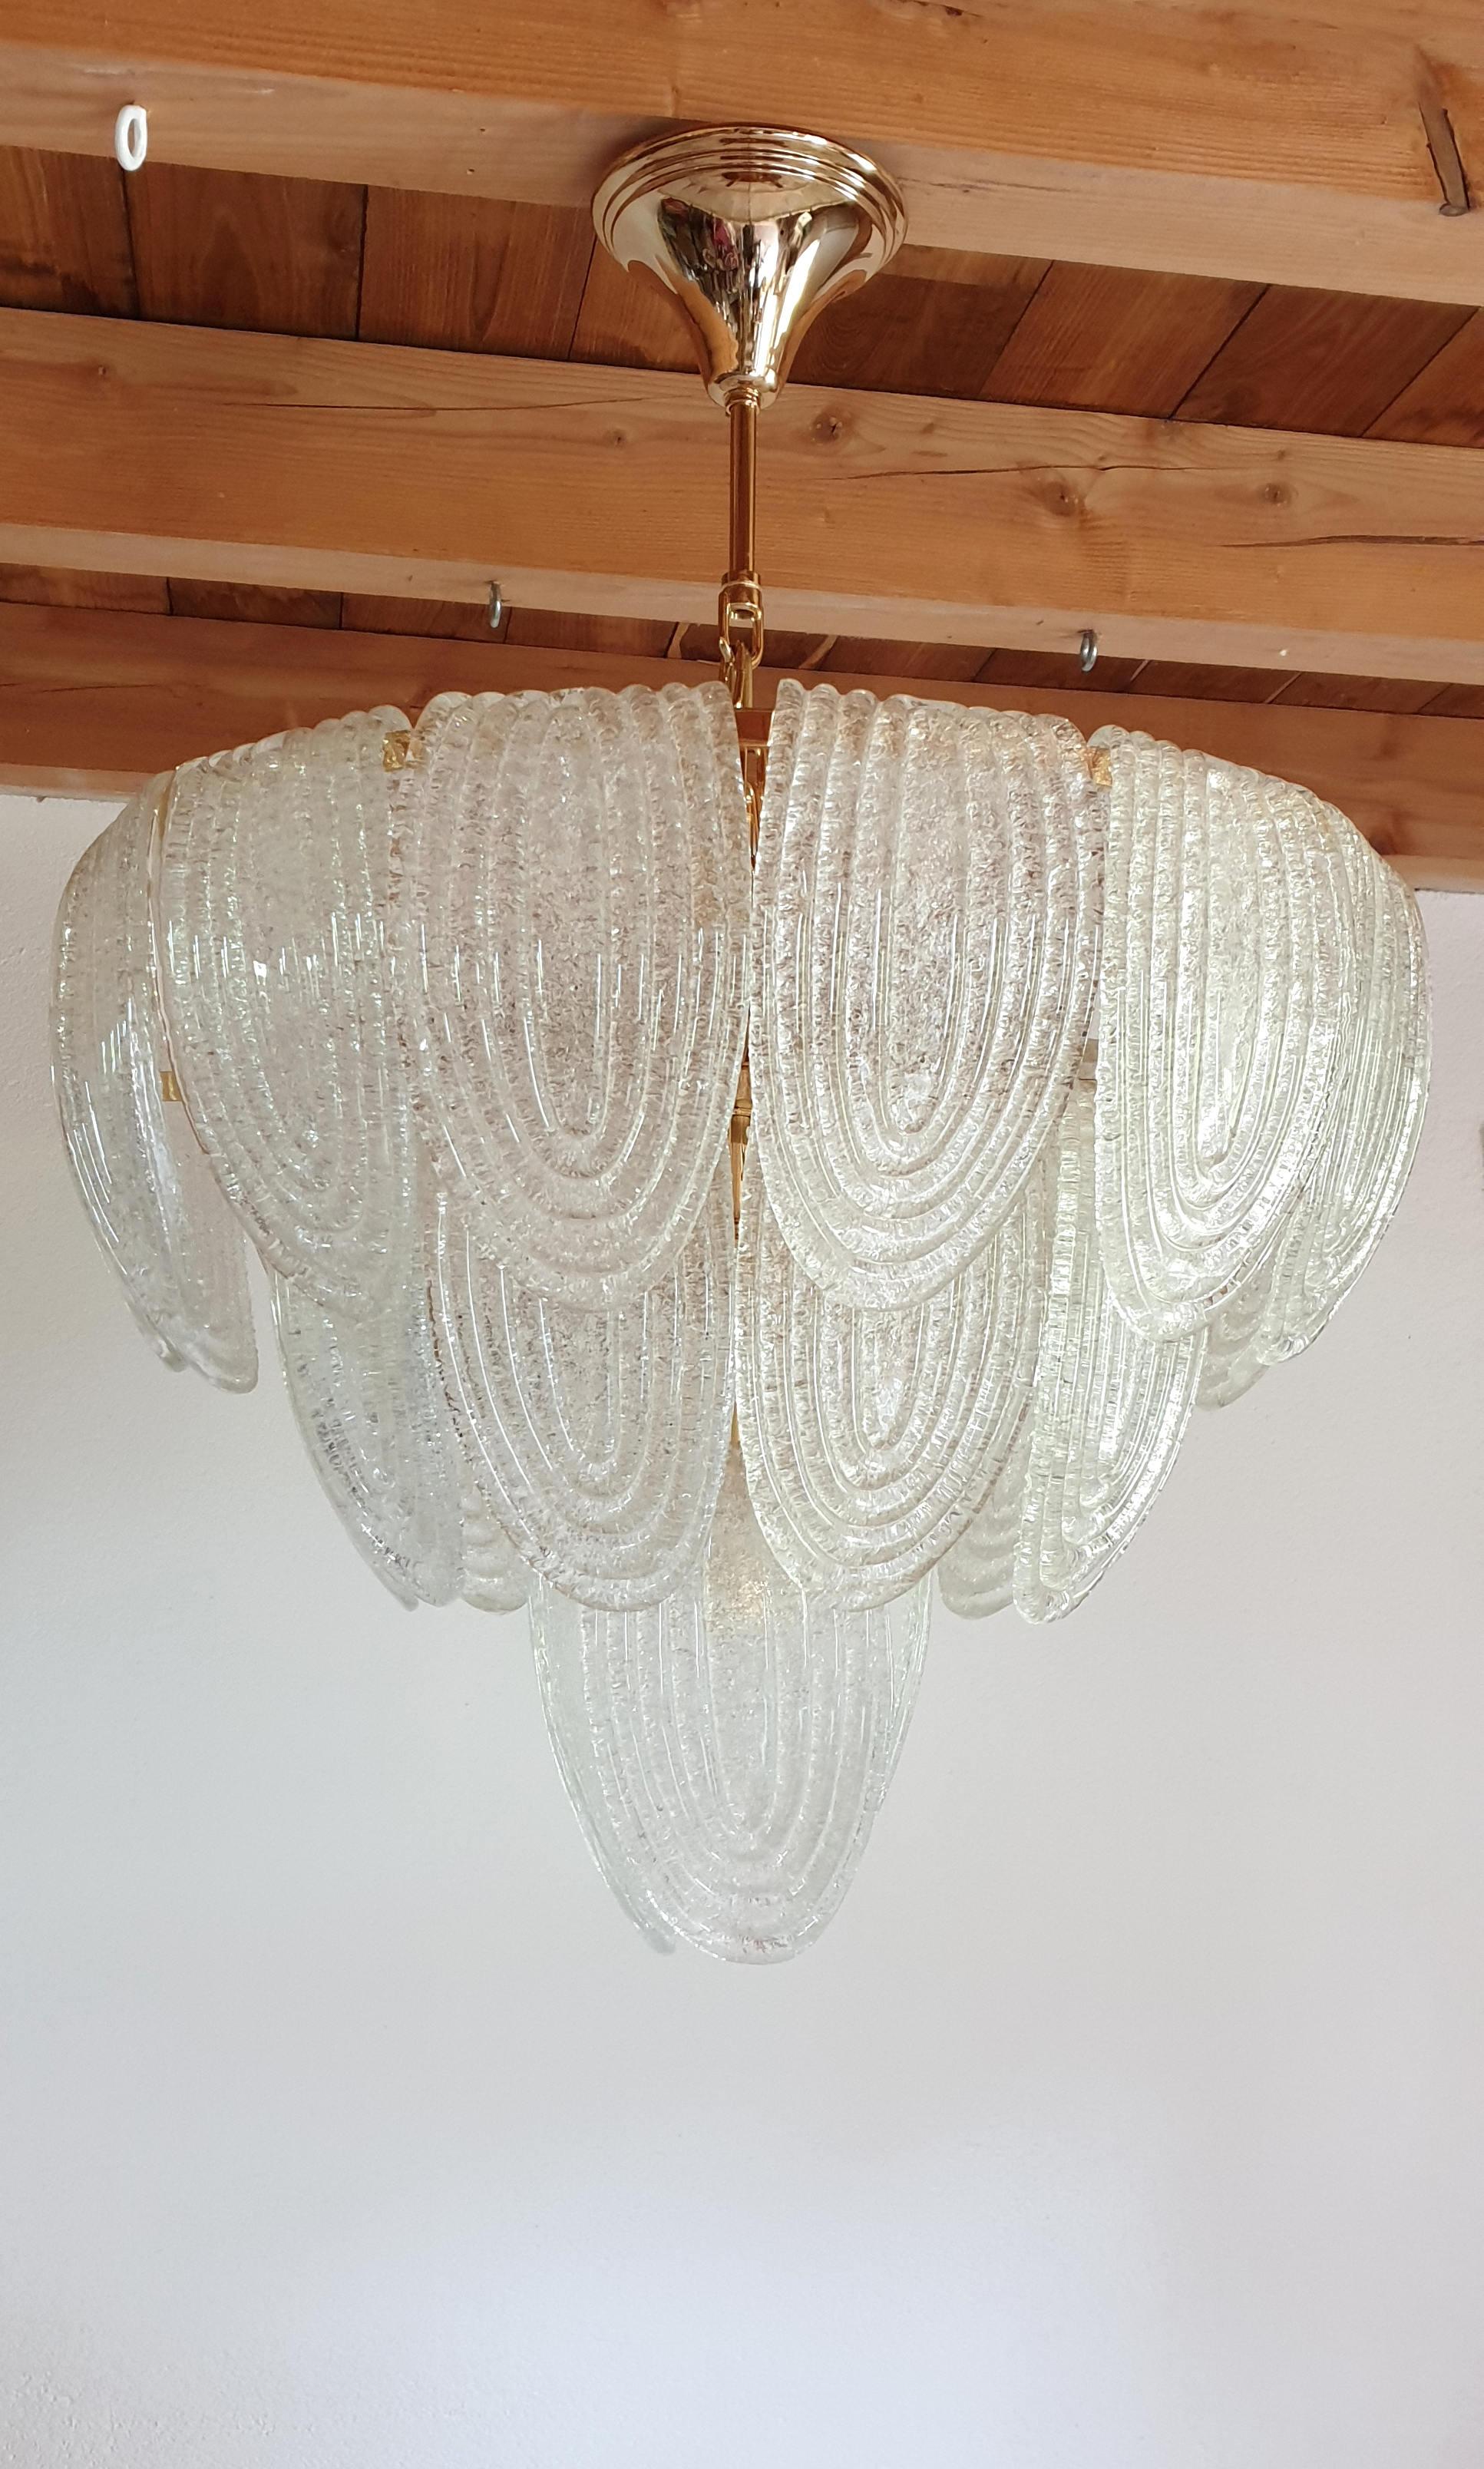 Hand-Crafted Mid-Century Modern Murano Glass and Plated Gold Chandelier by Mazzega